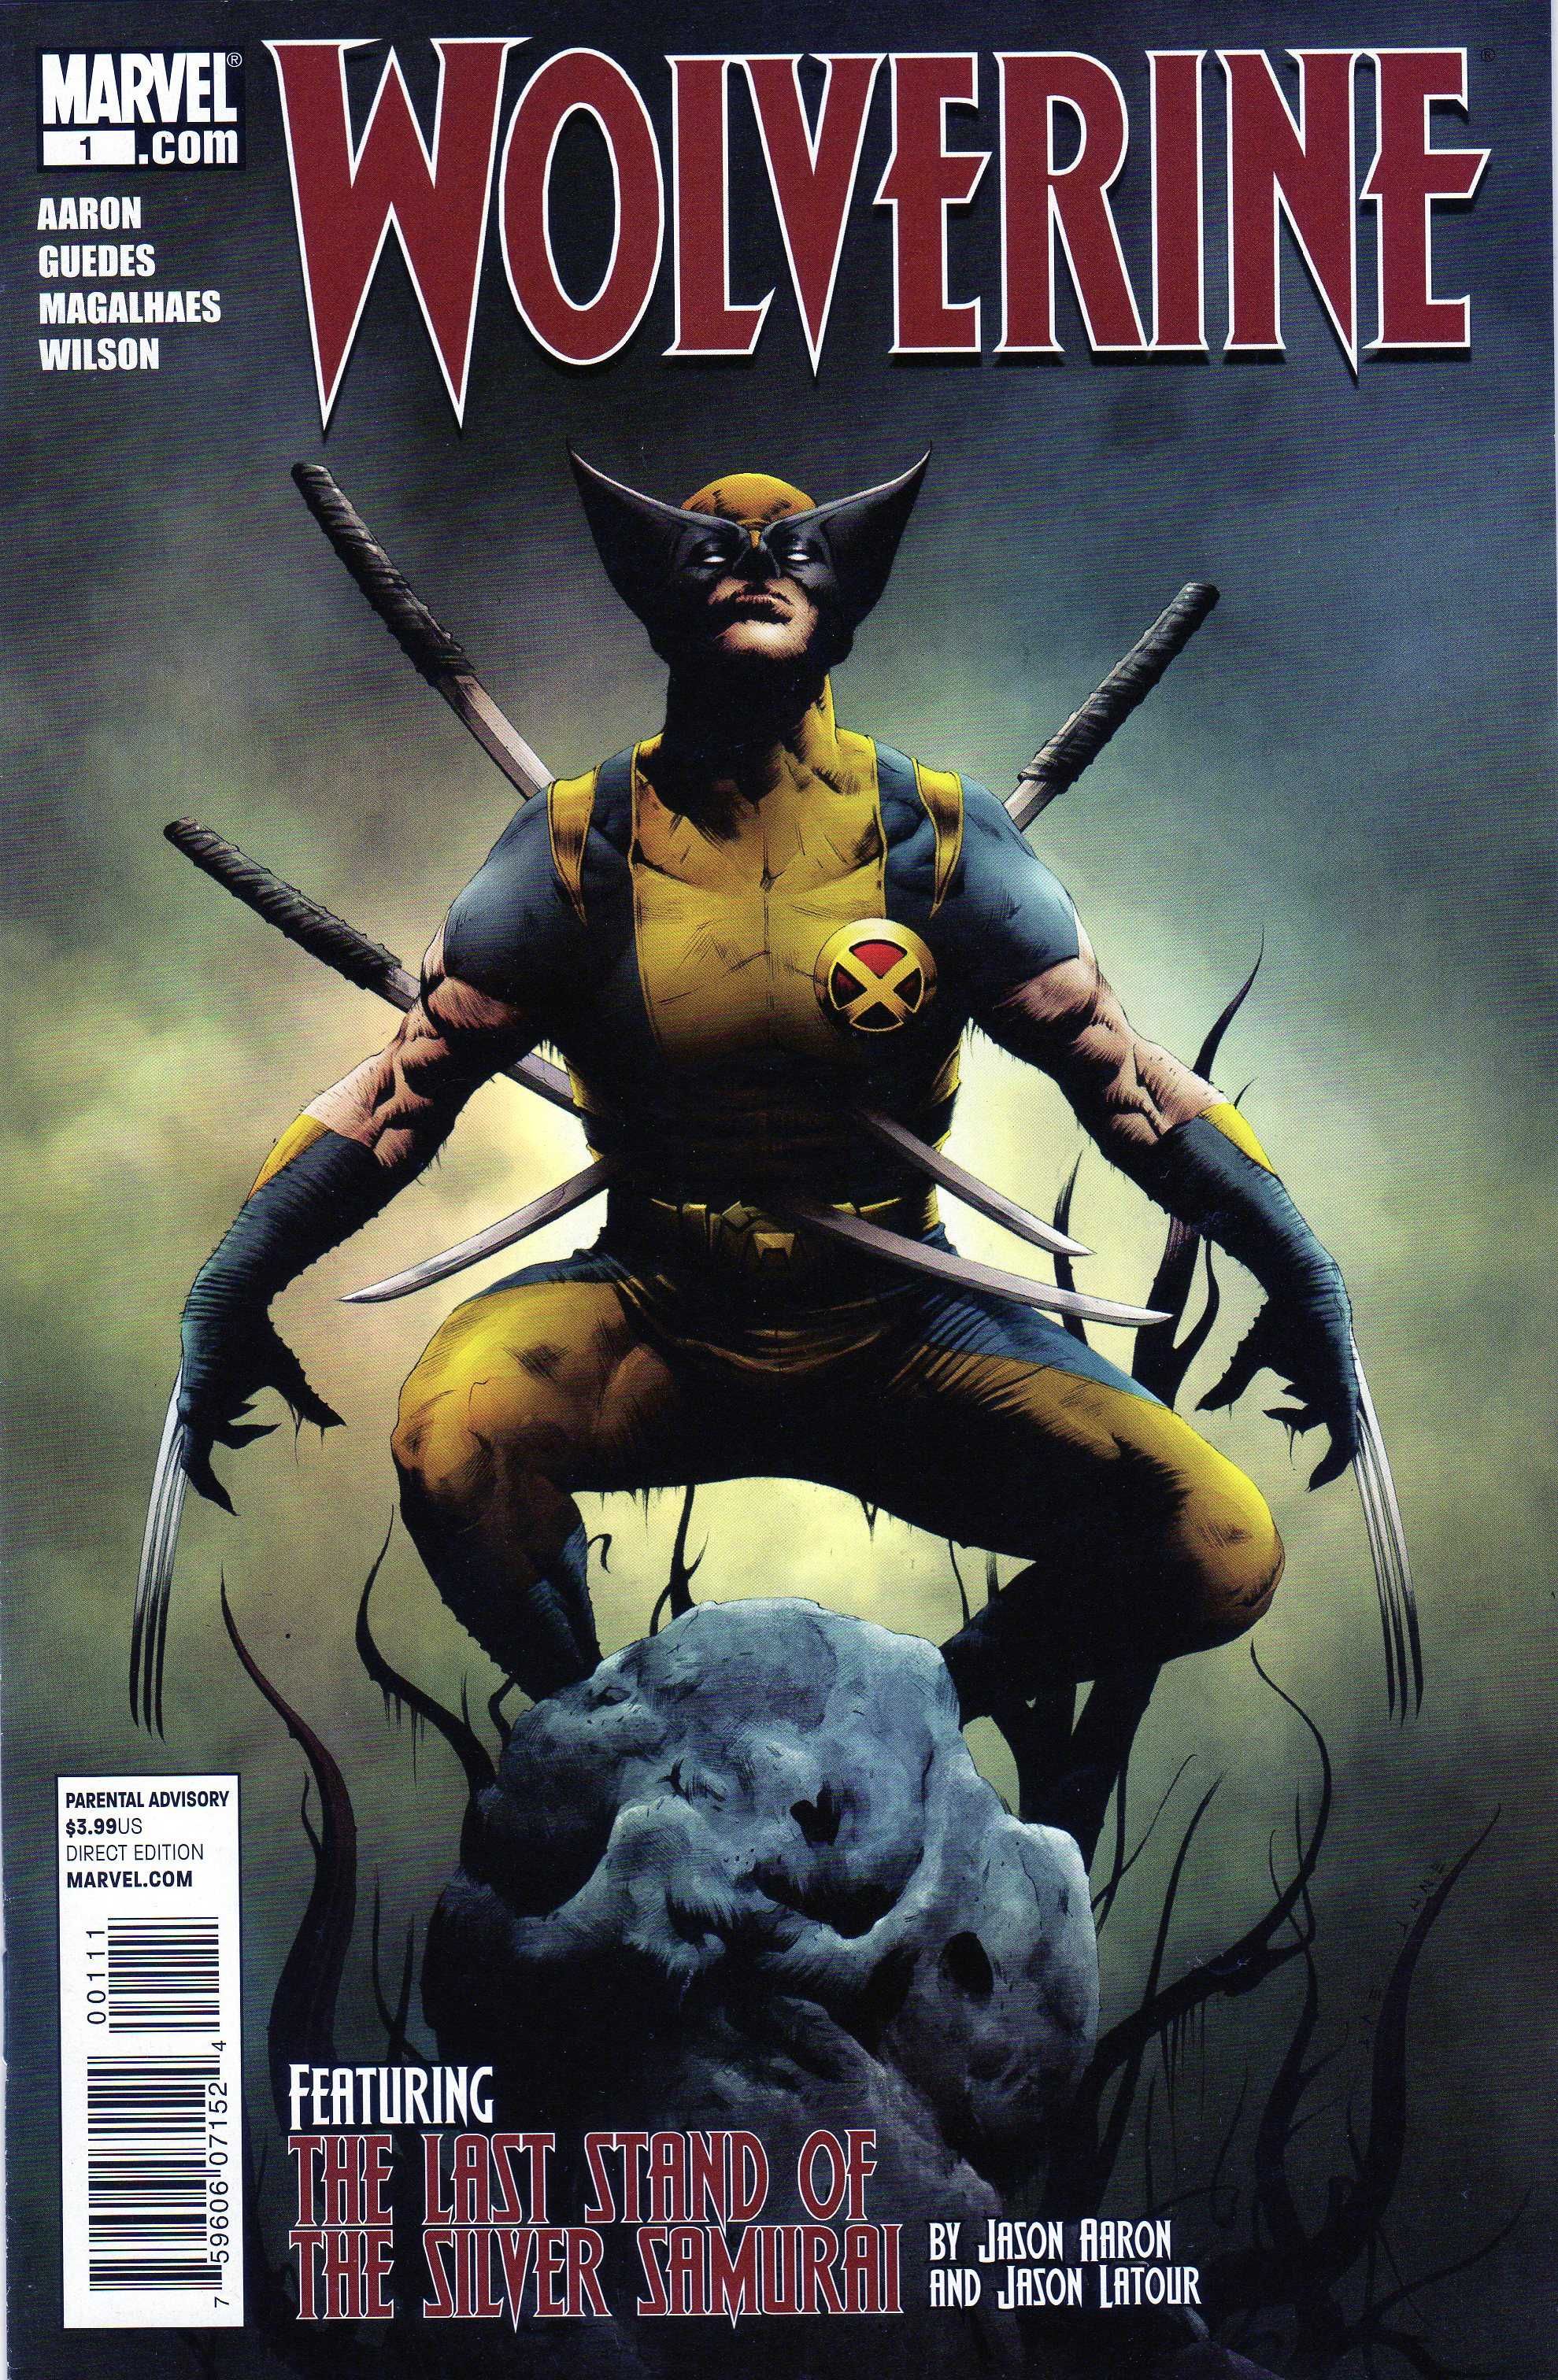 Wolverine #1 ft. The last stand of The Silver Samurai